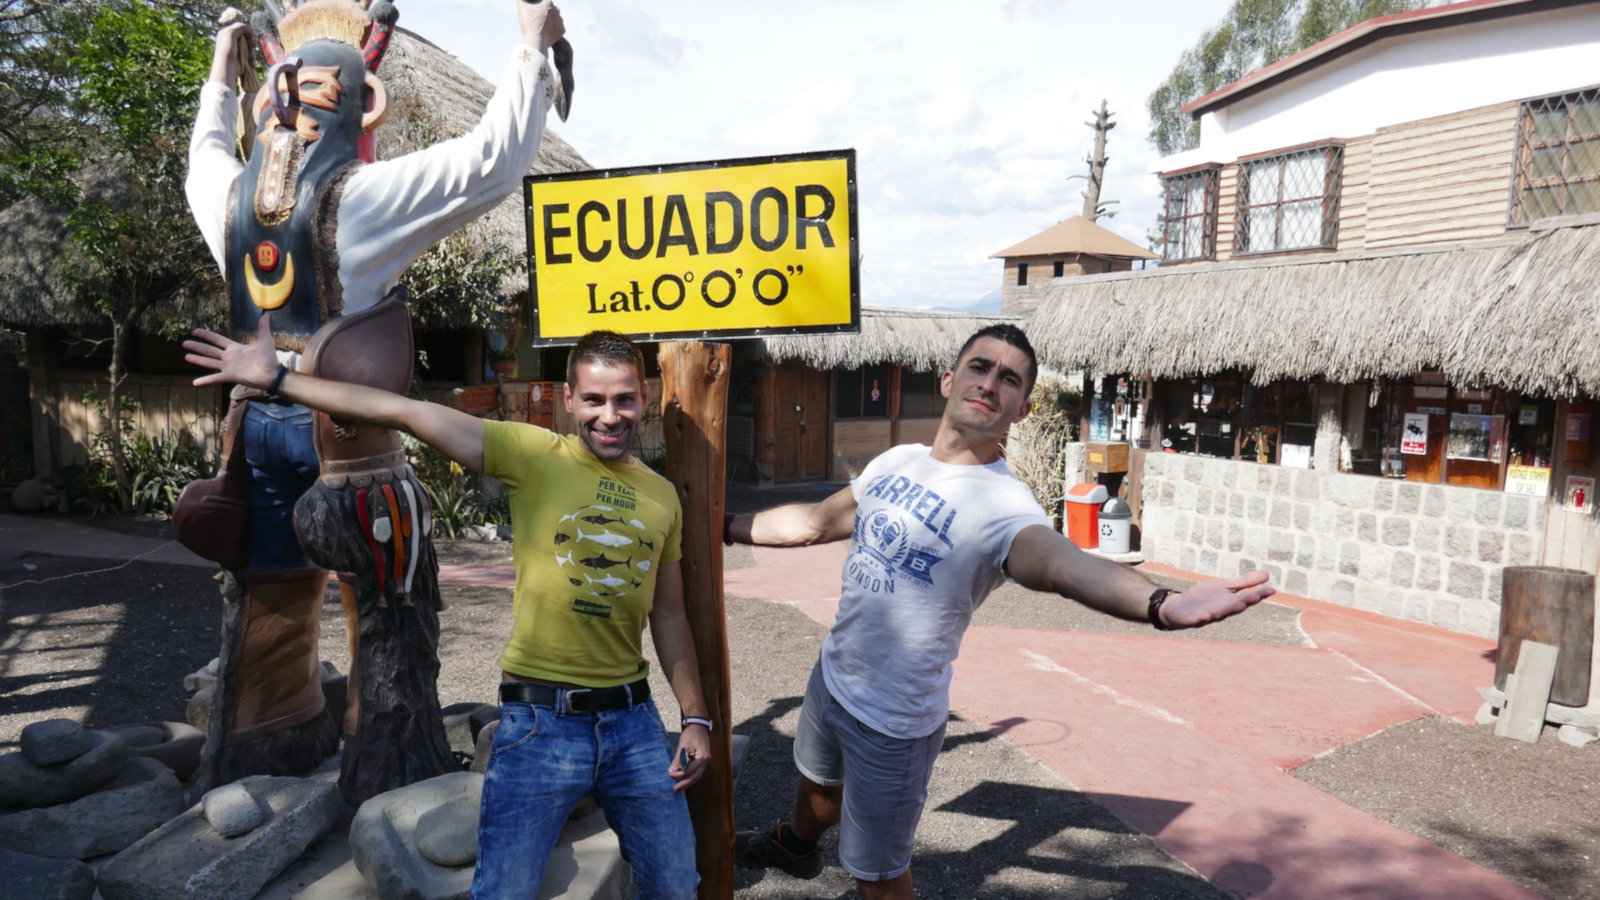 Ecuador was named for the Equator line passing through it, which you can visit